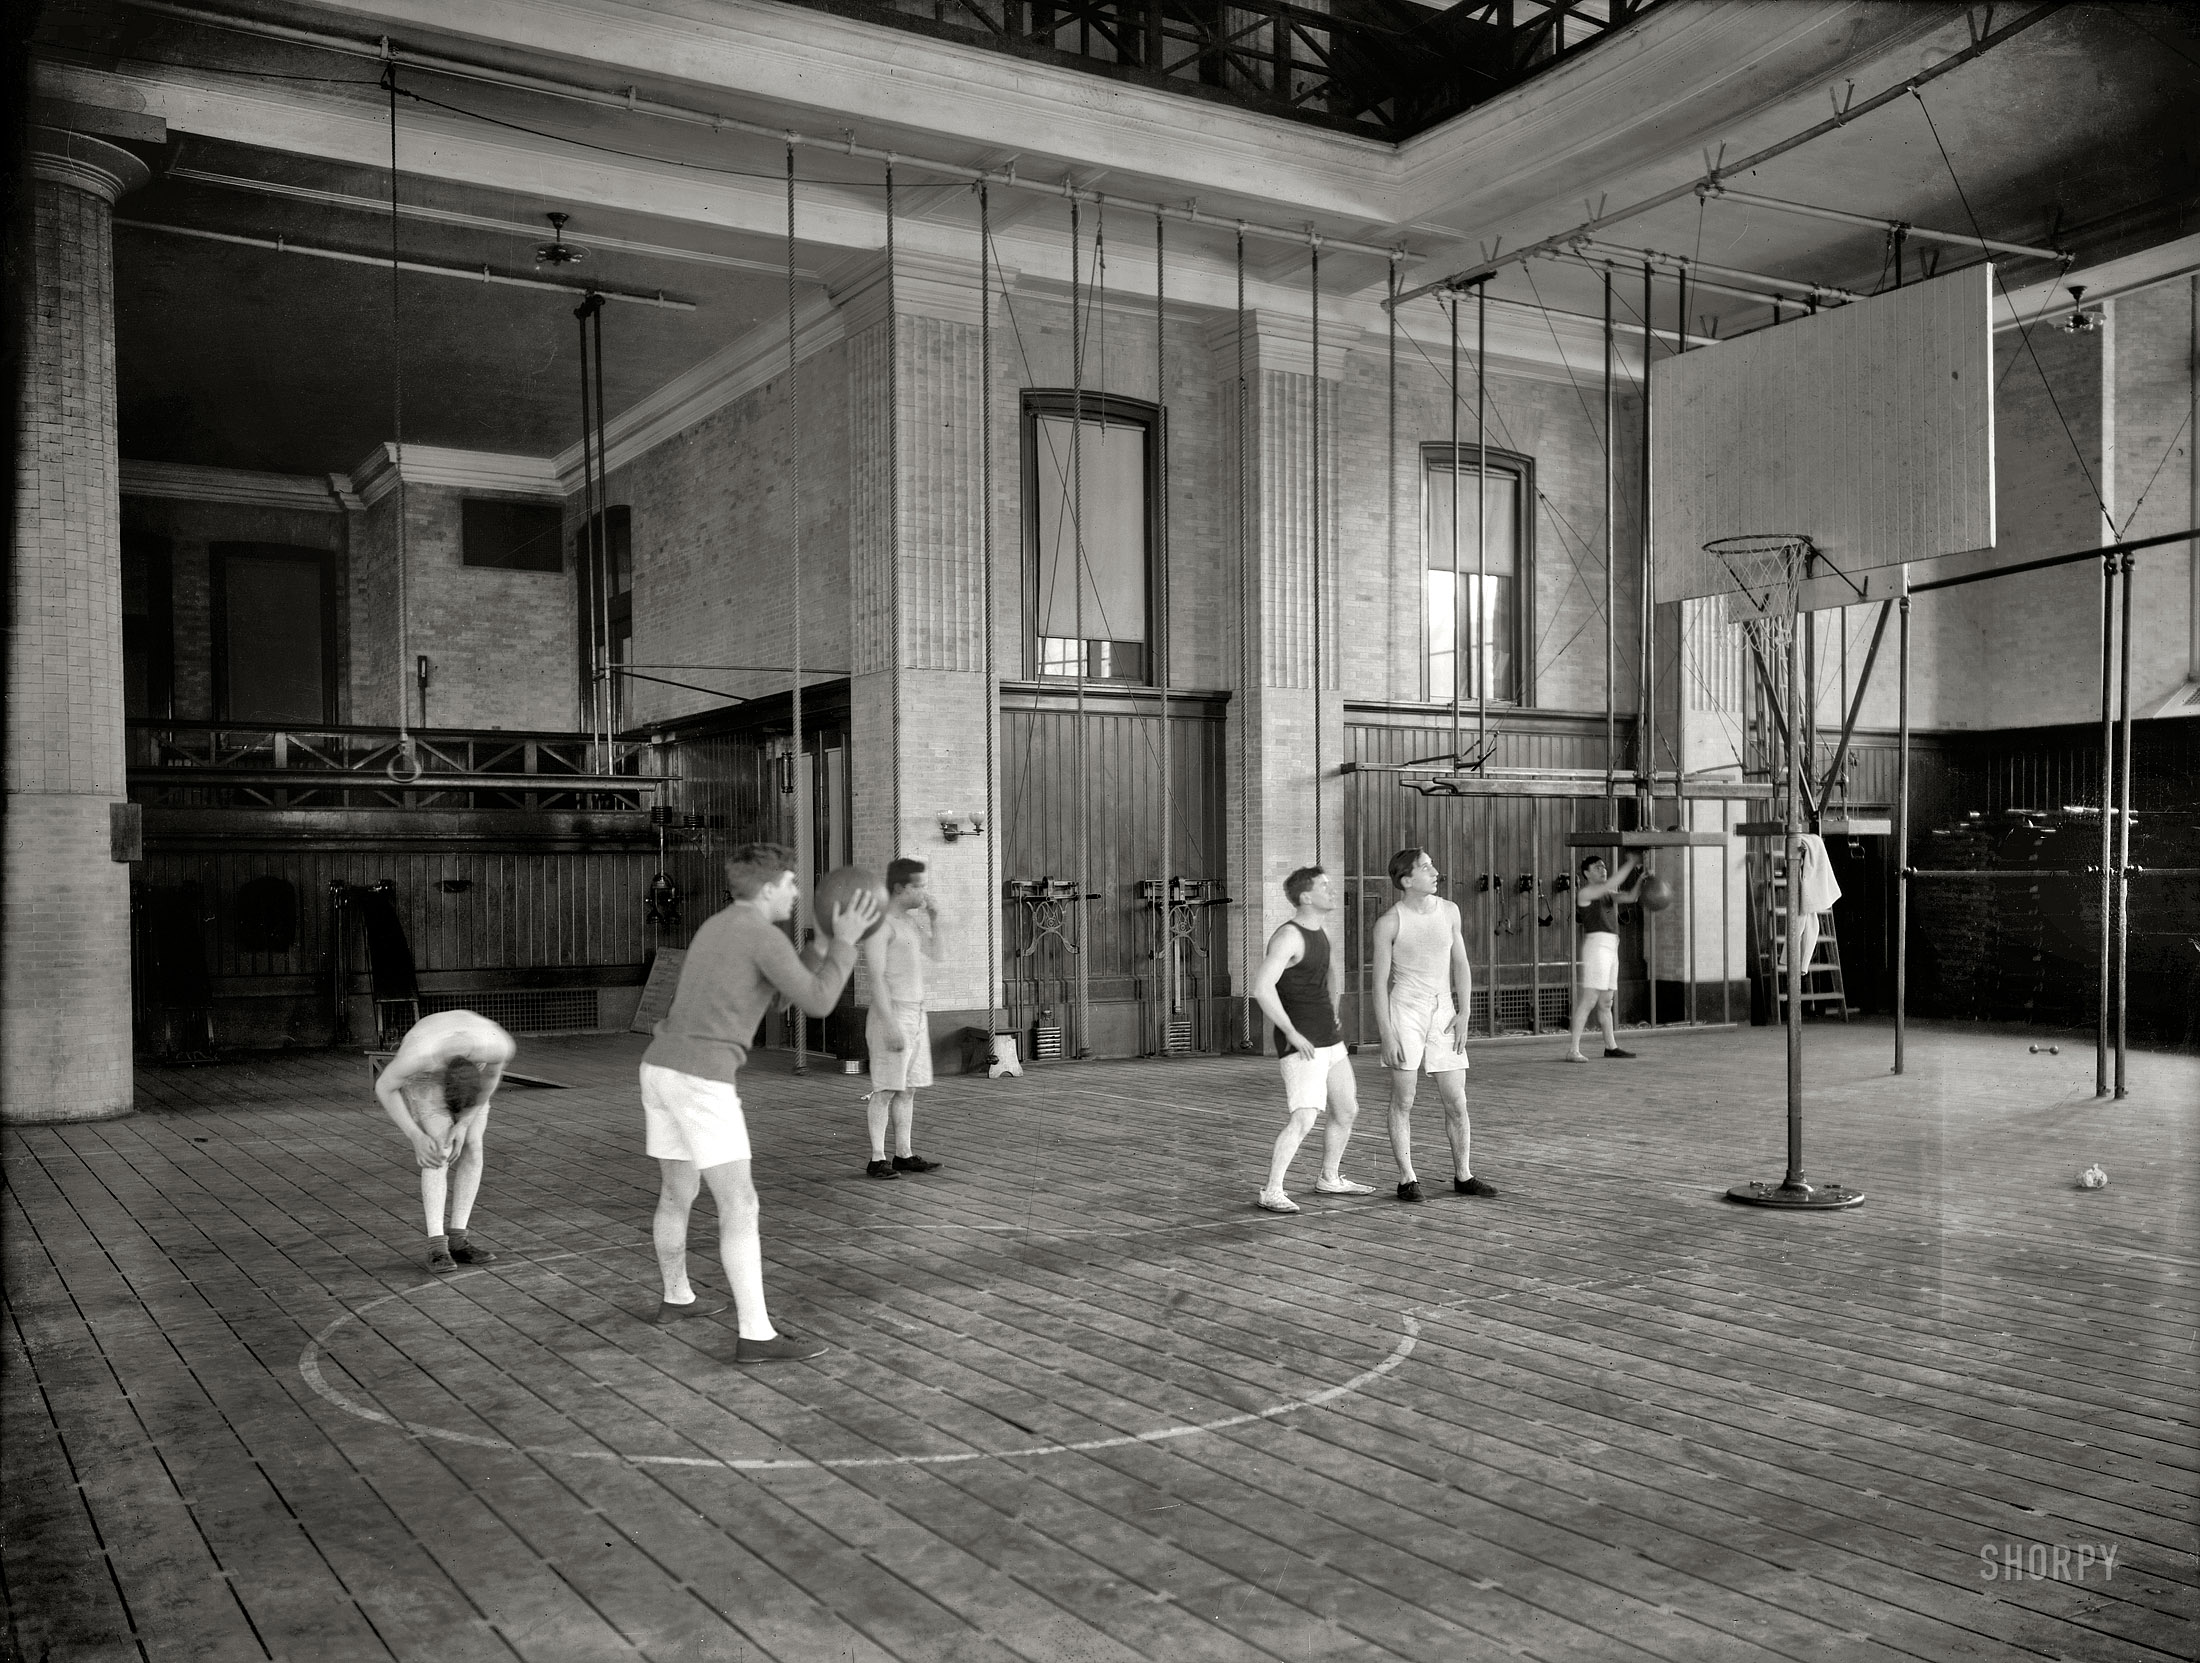 New York circa 1908. "Basket-ball at Columbia University." A short workout in the gym. 8x10 glass negative, George Grantham Bain Collection. View full size.